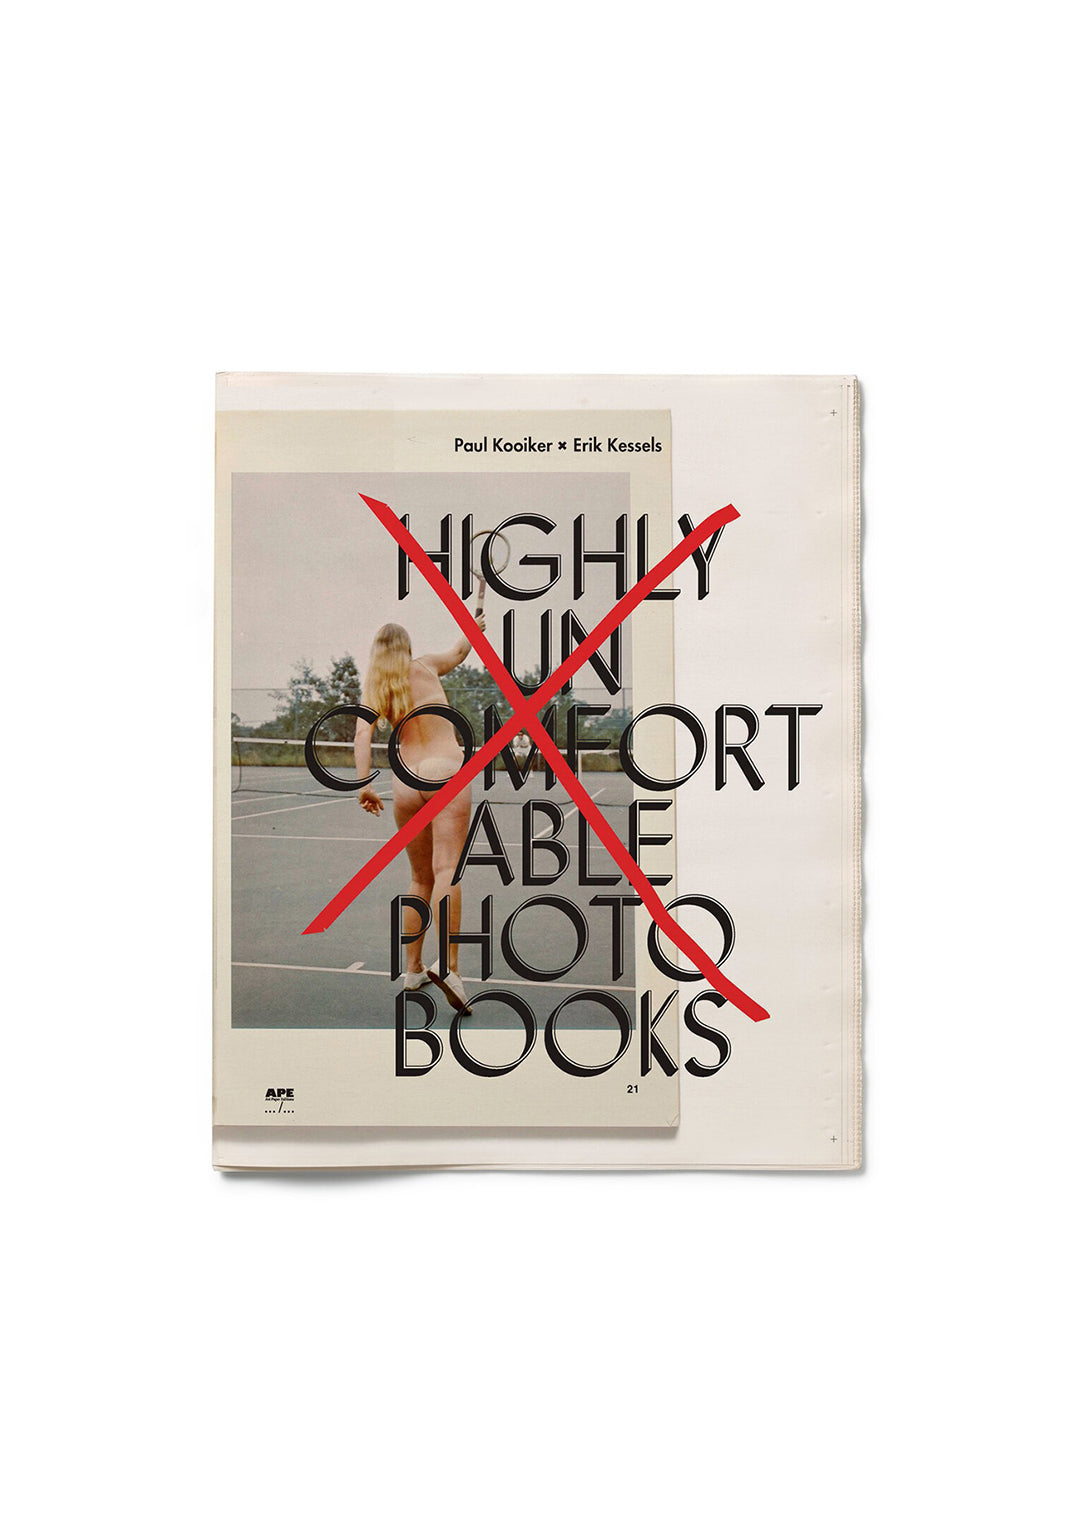 Highly Uncomfortable Photo Books